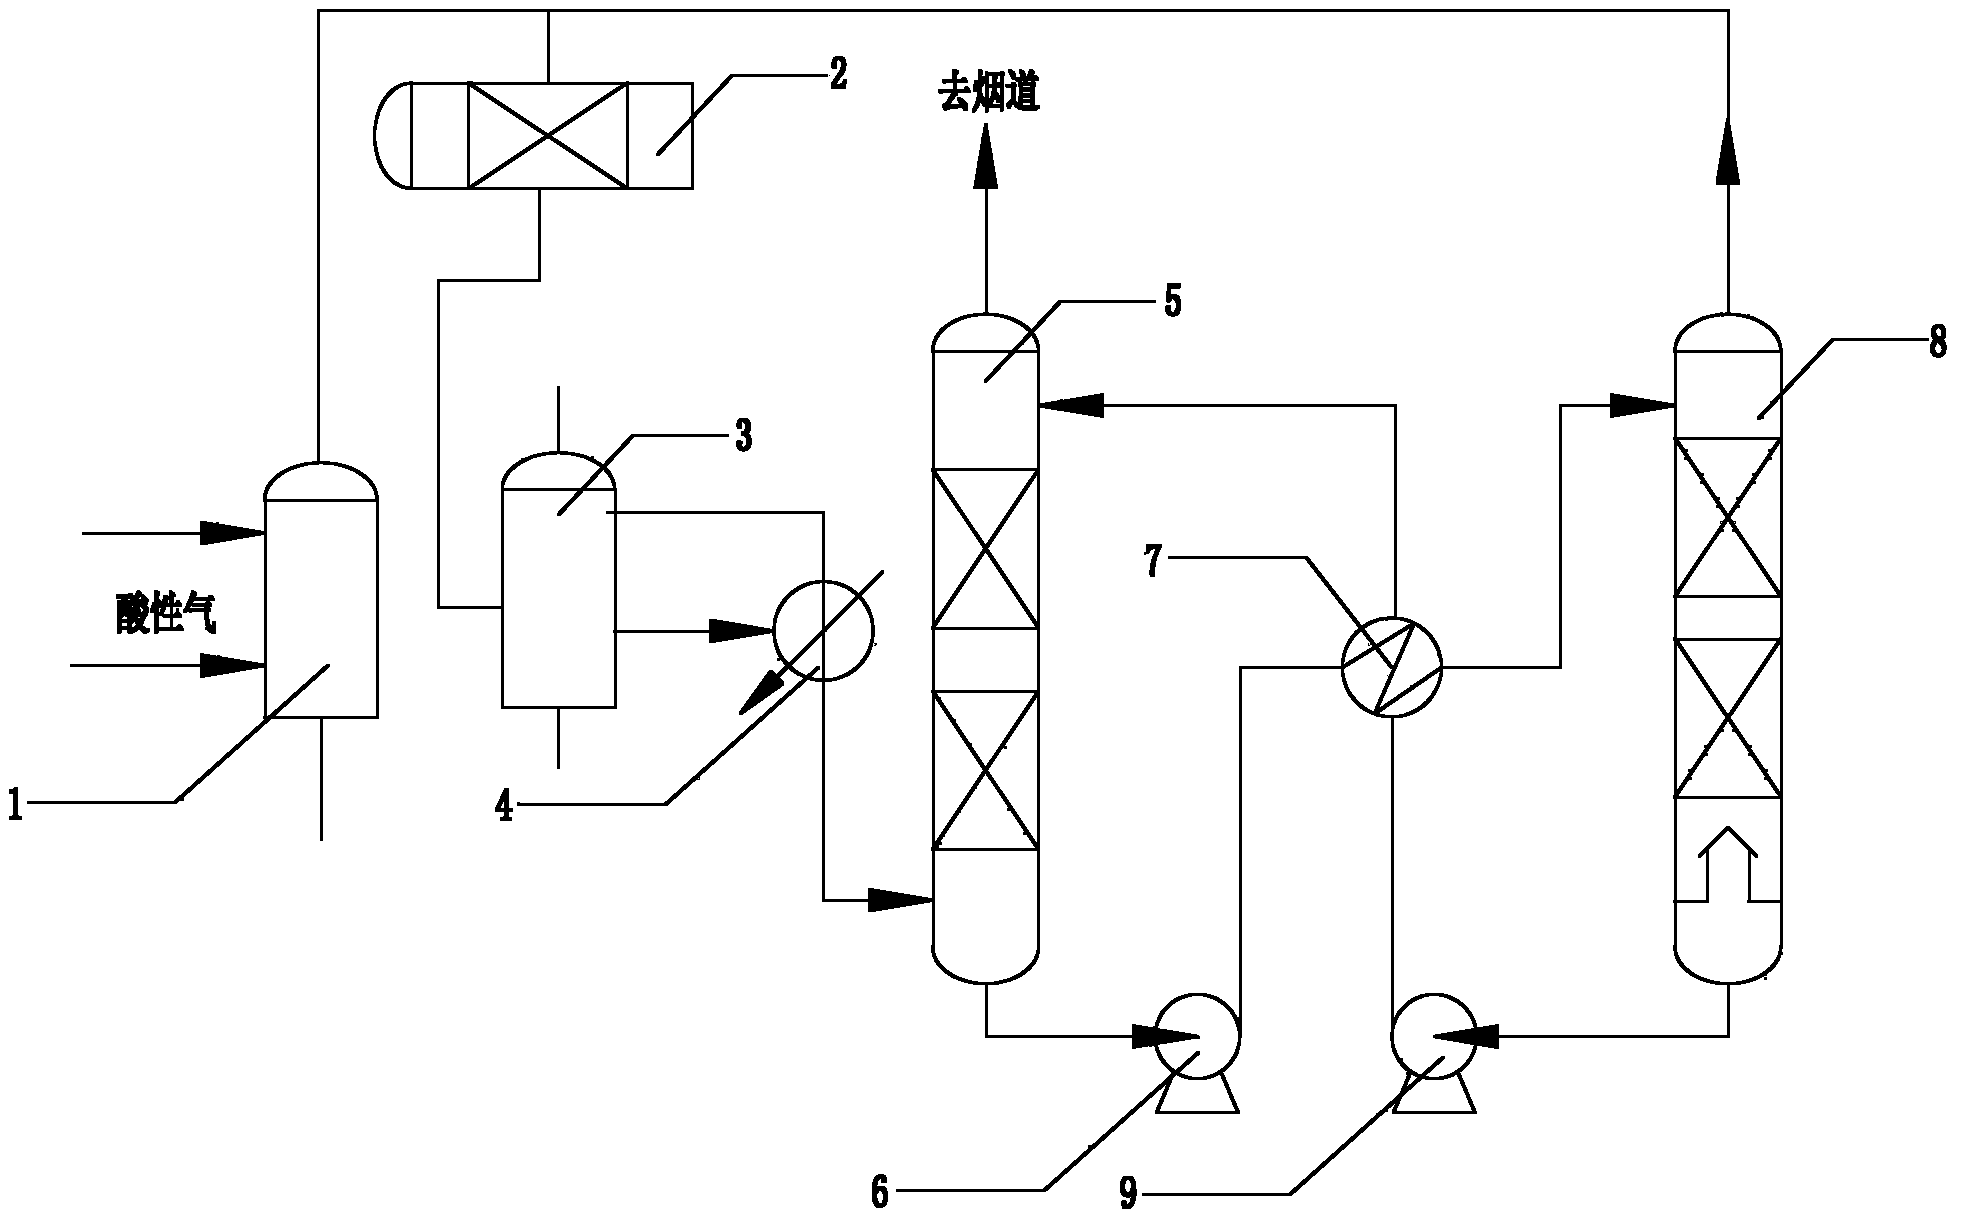 SWSR (SunWay Sulfur recovery)-1 device and technique